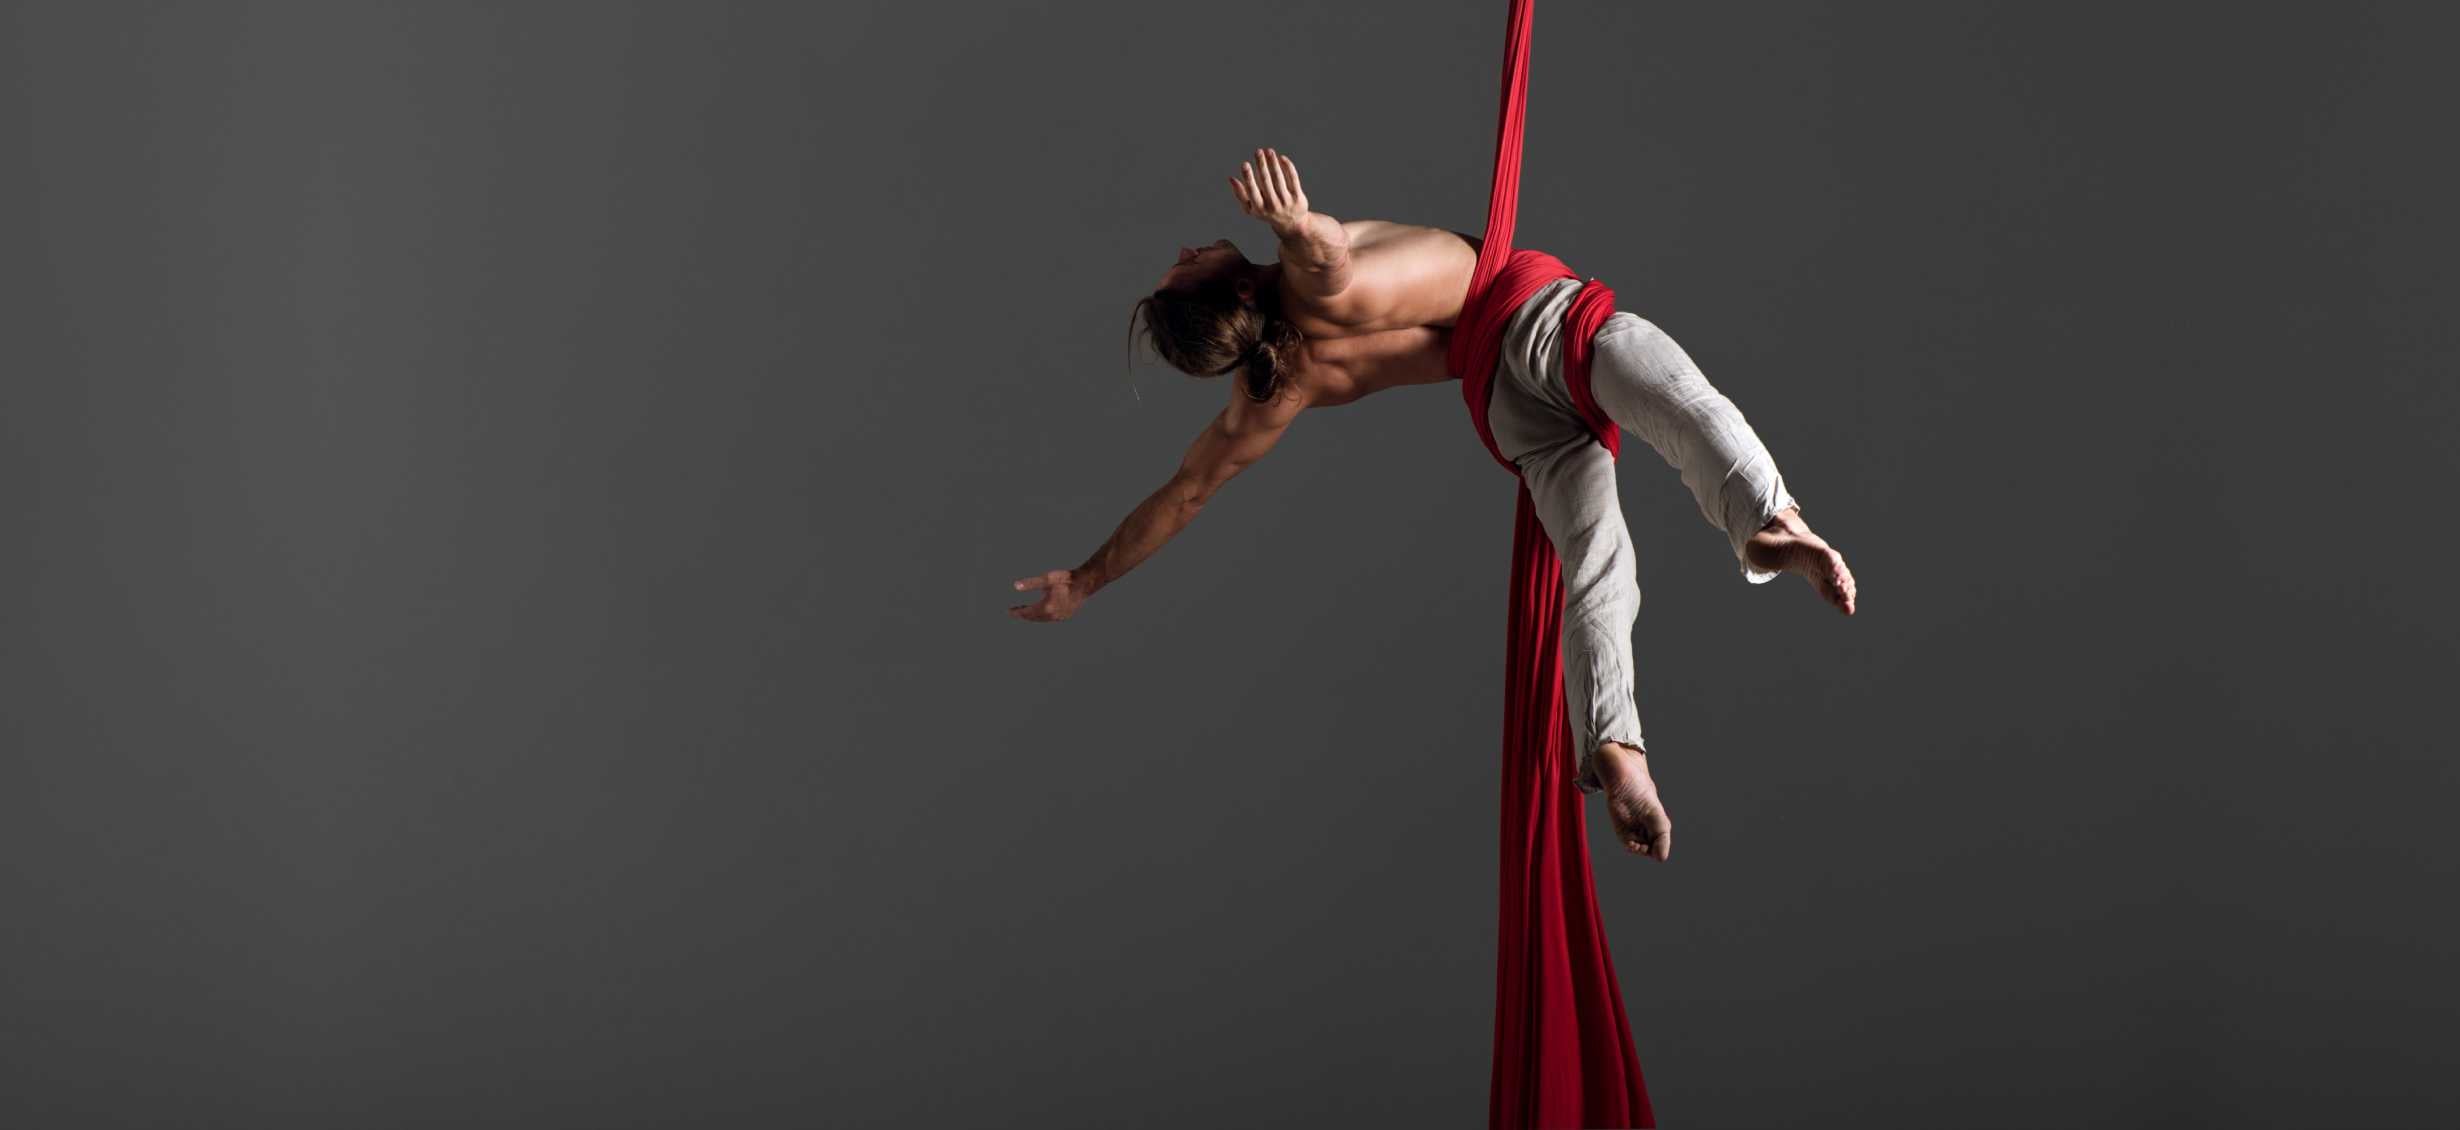 How to Rig Aerial Silks